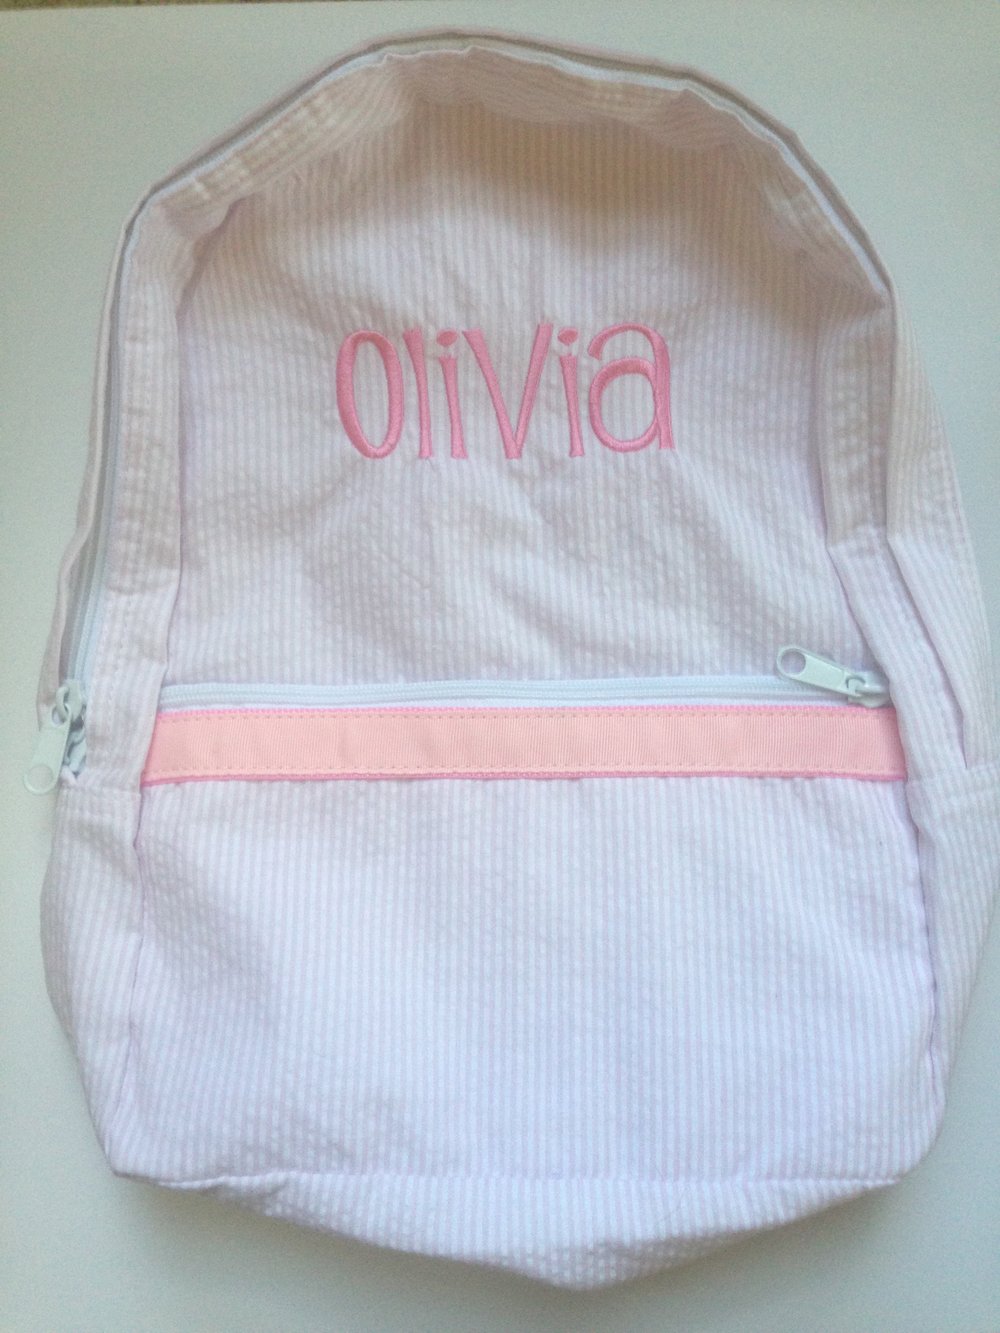 Image of Backpack